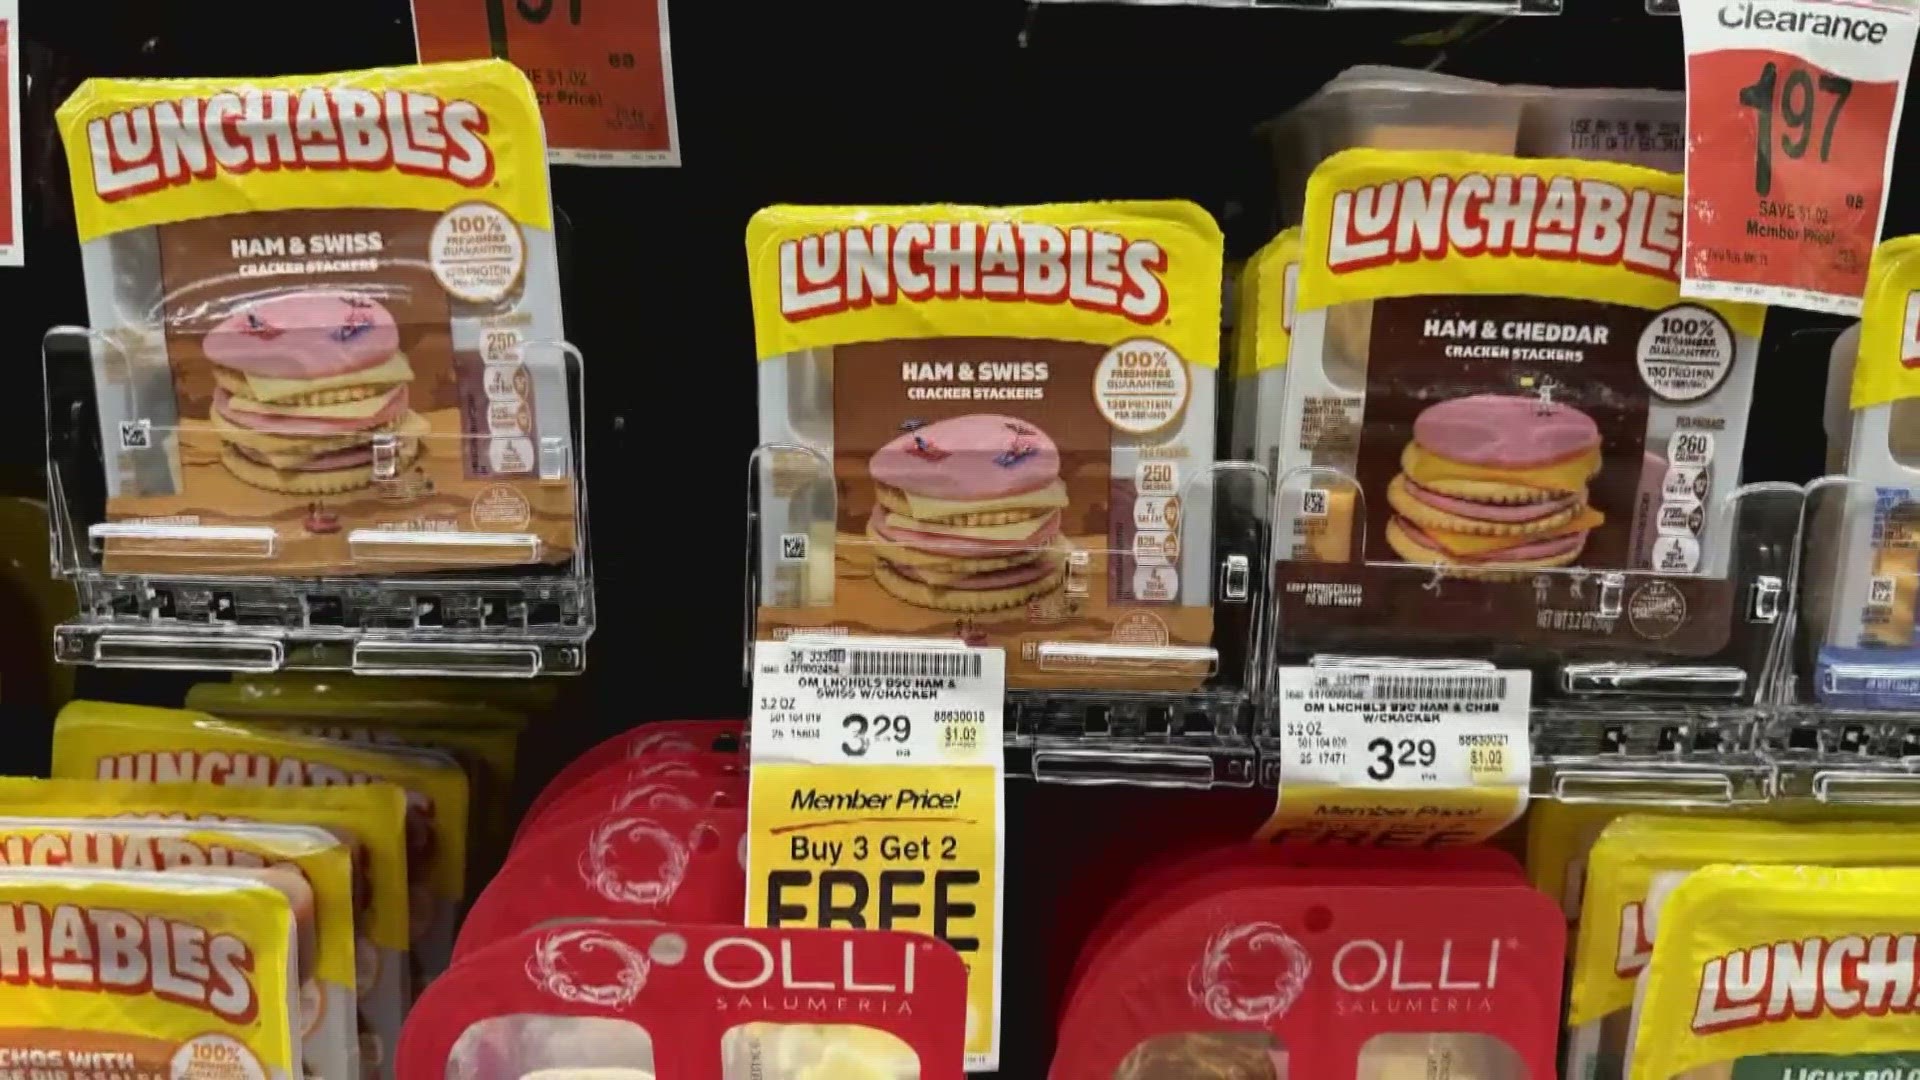 The Lunchables that are part of a federal school meal program reportedly have higher levels of sodium than their store-bought counterparts, as well as toxic metals.